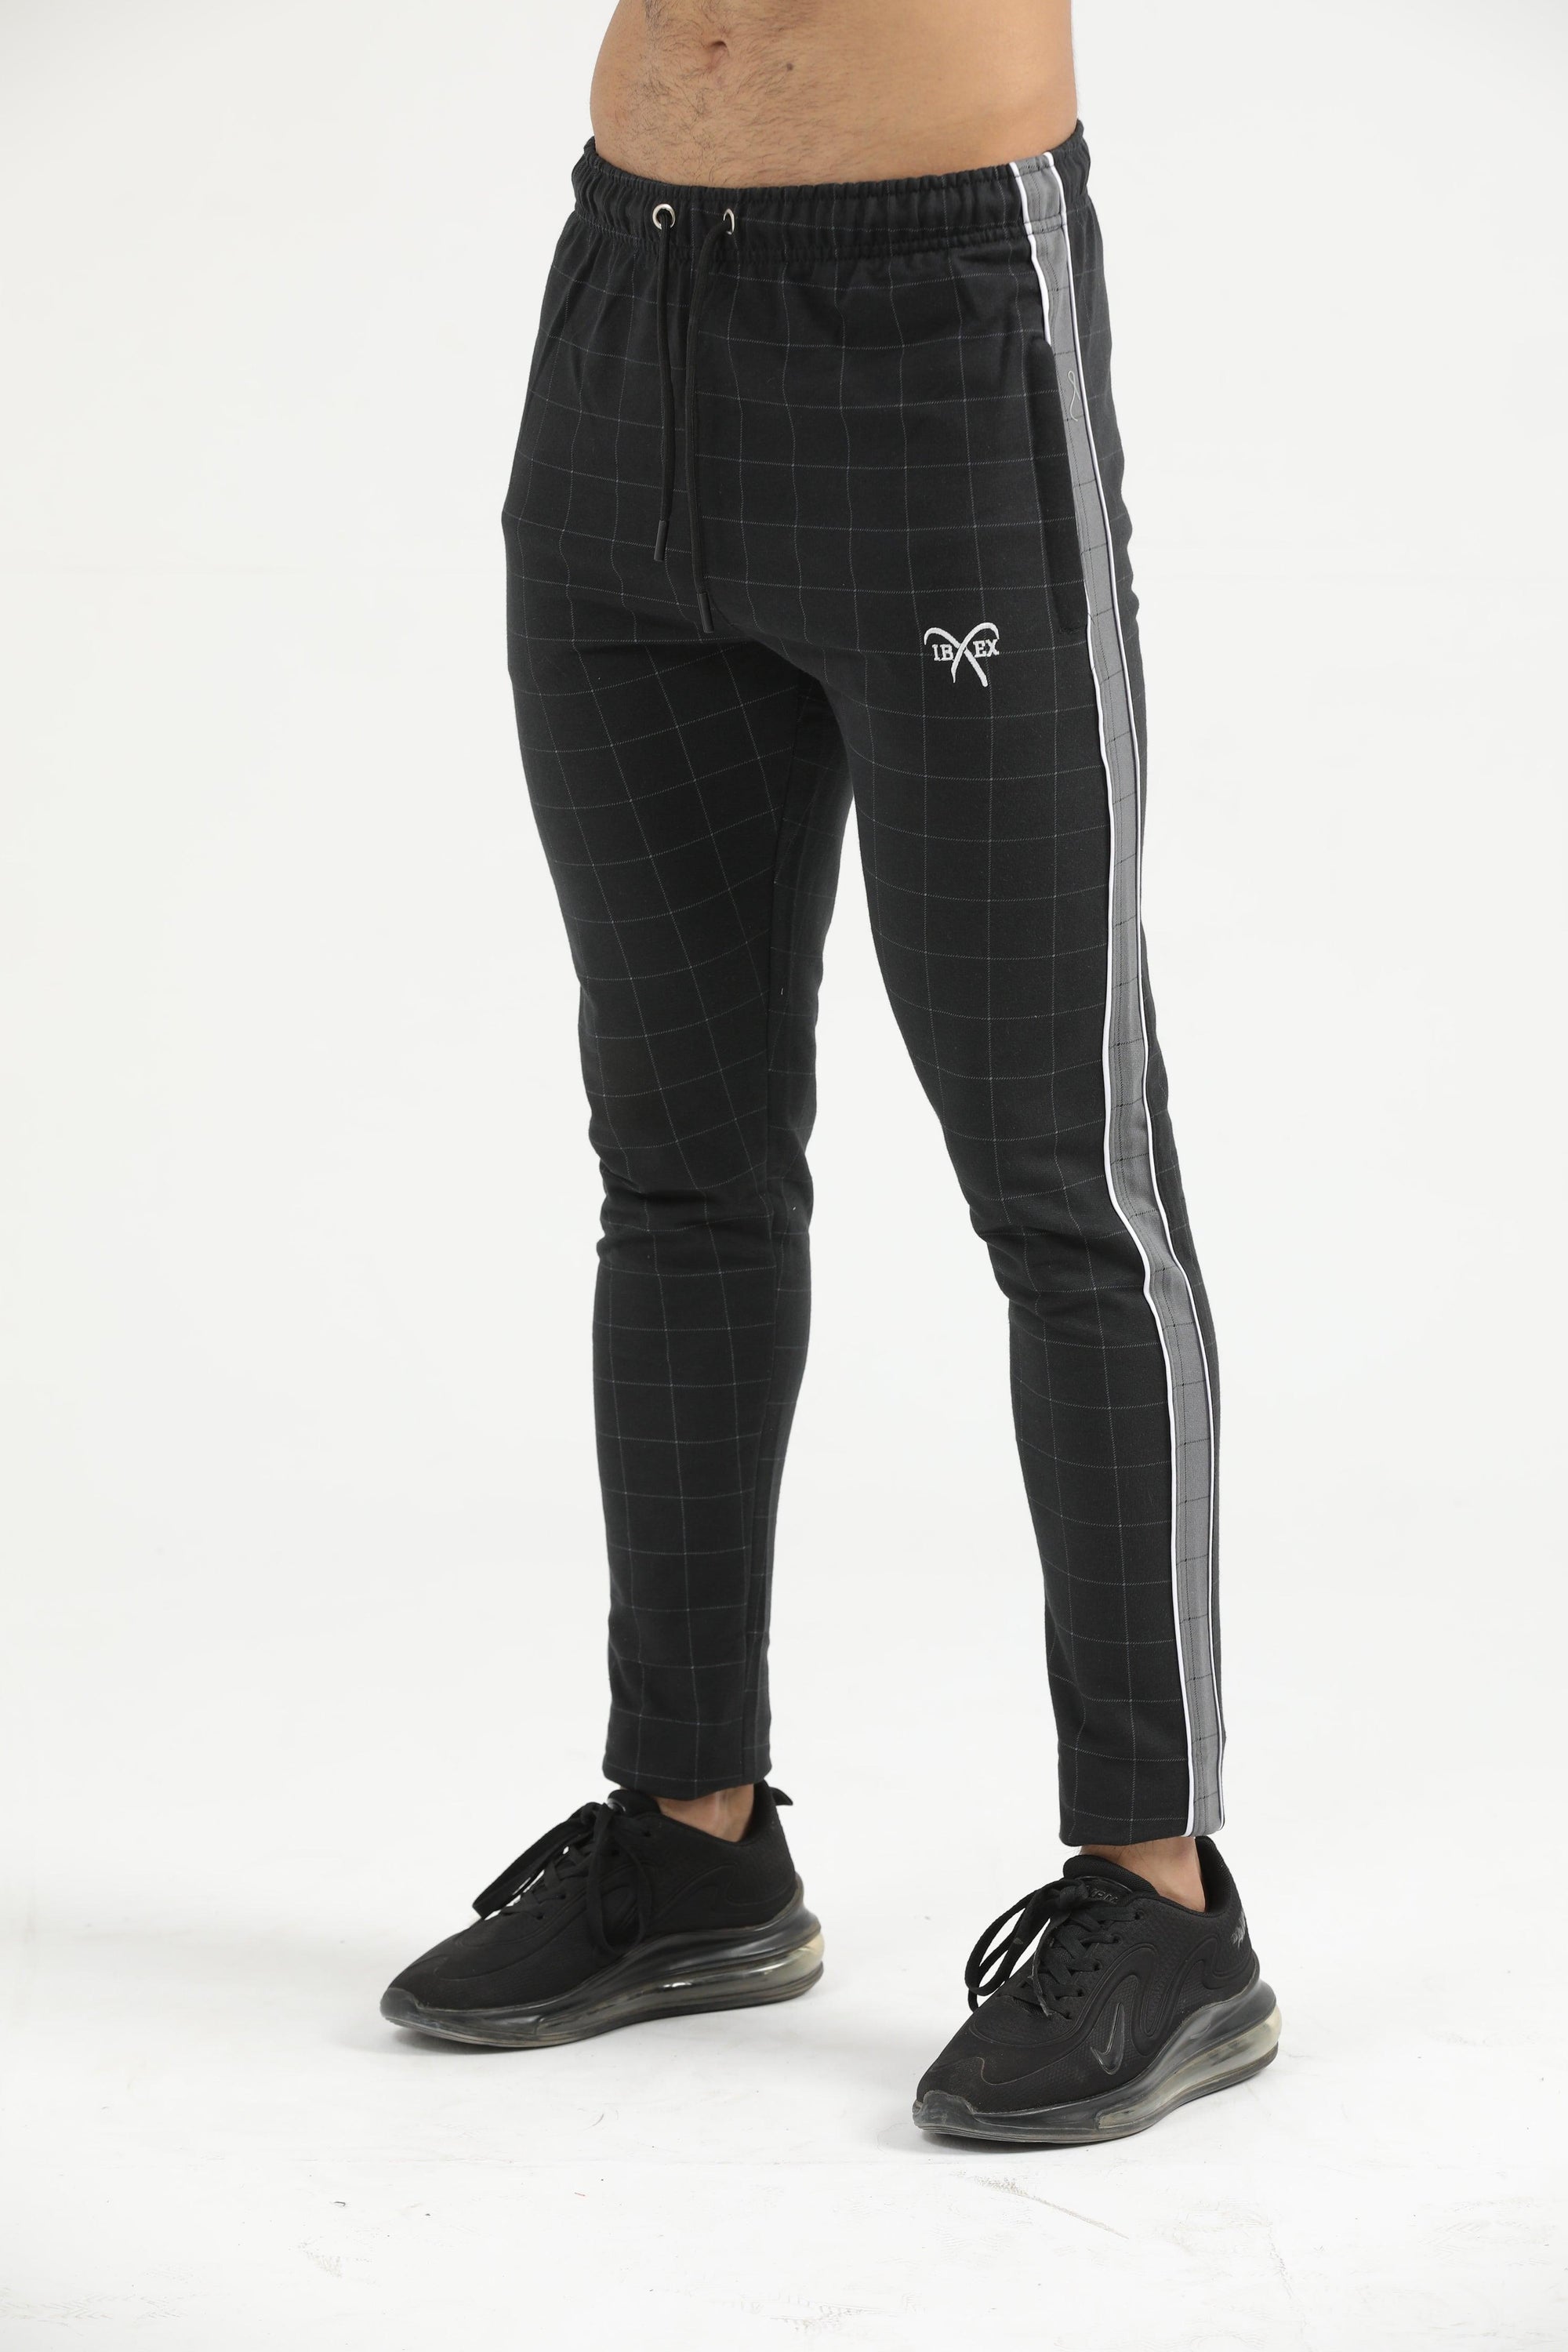 Black Checker Trouser with Grey Side Panel and Piping